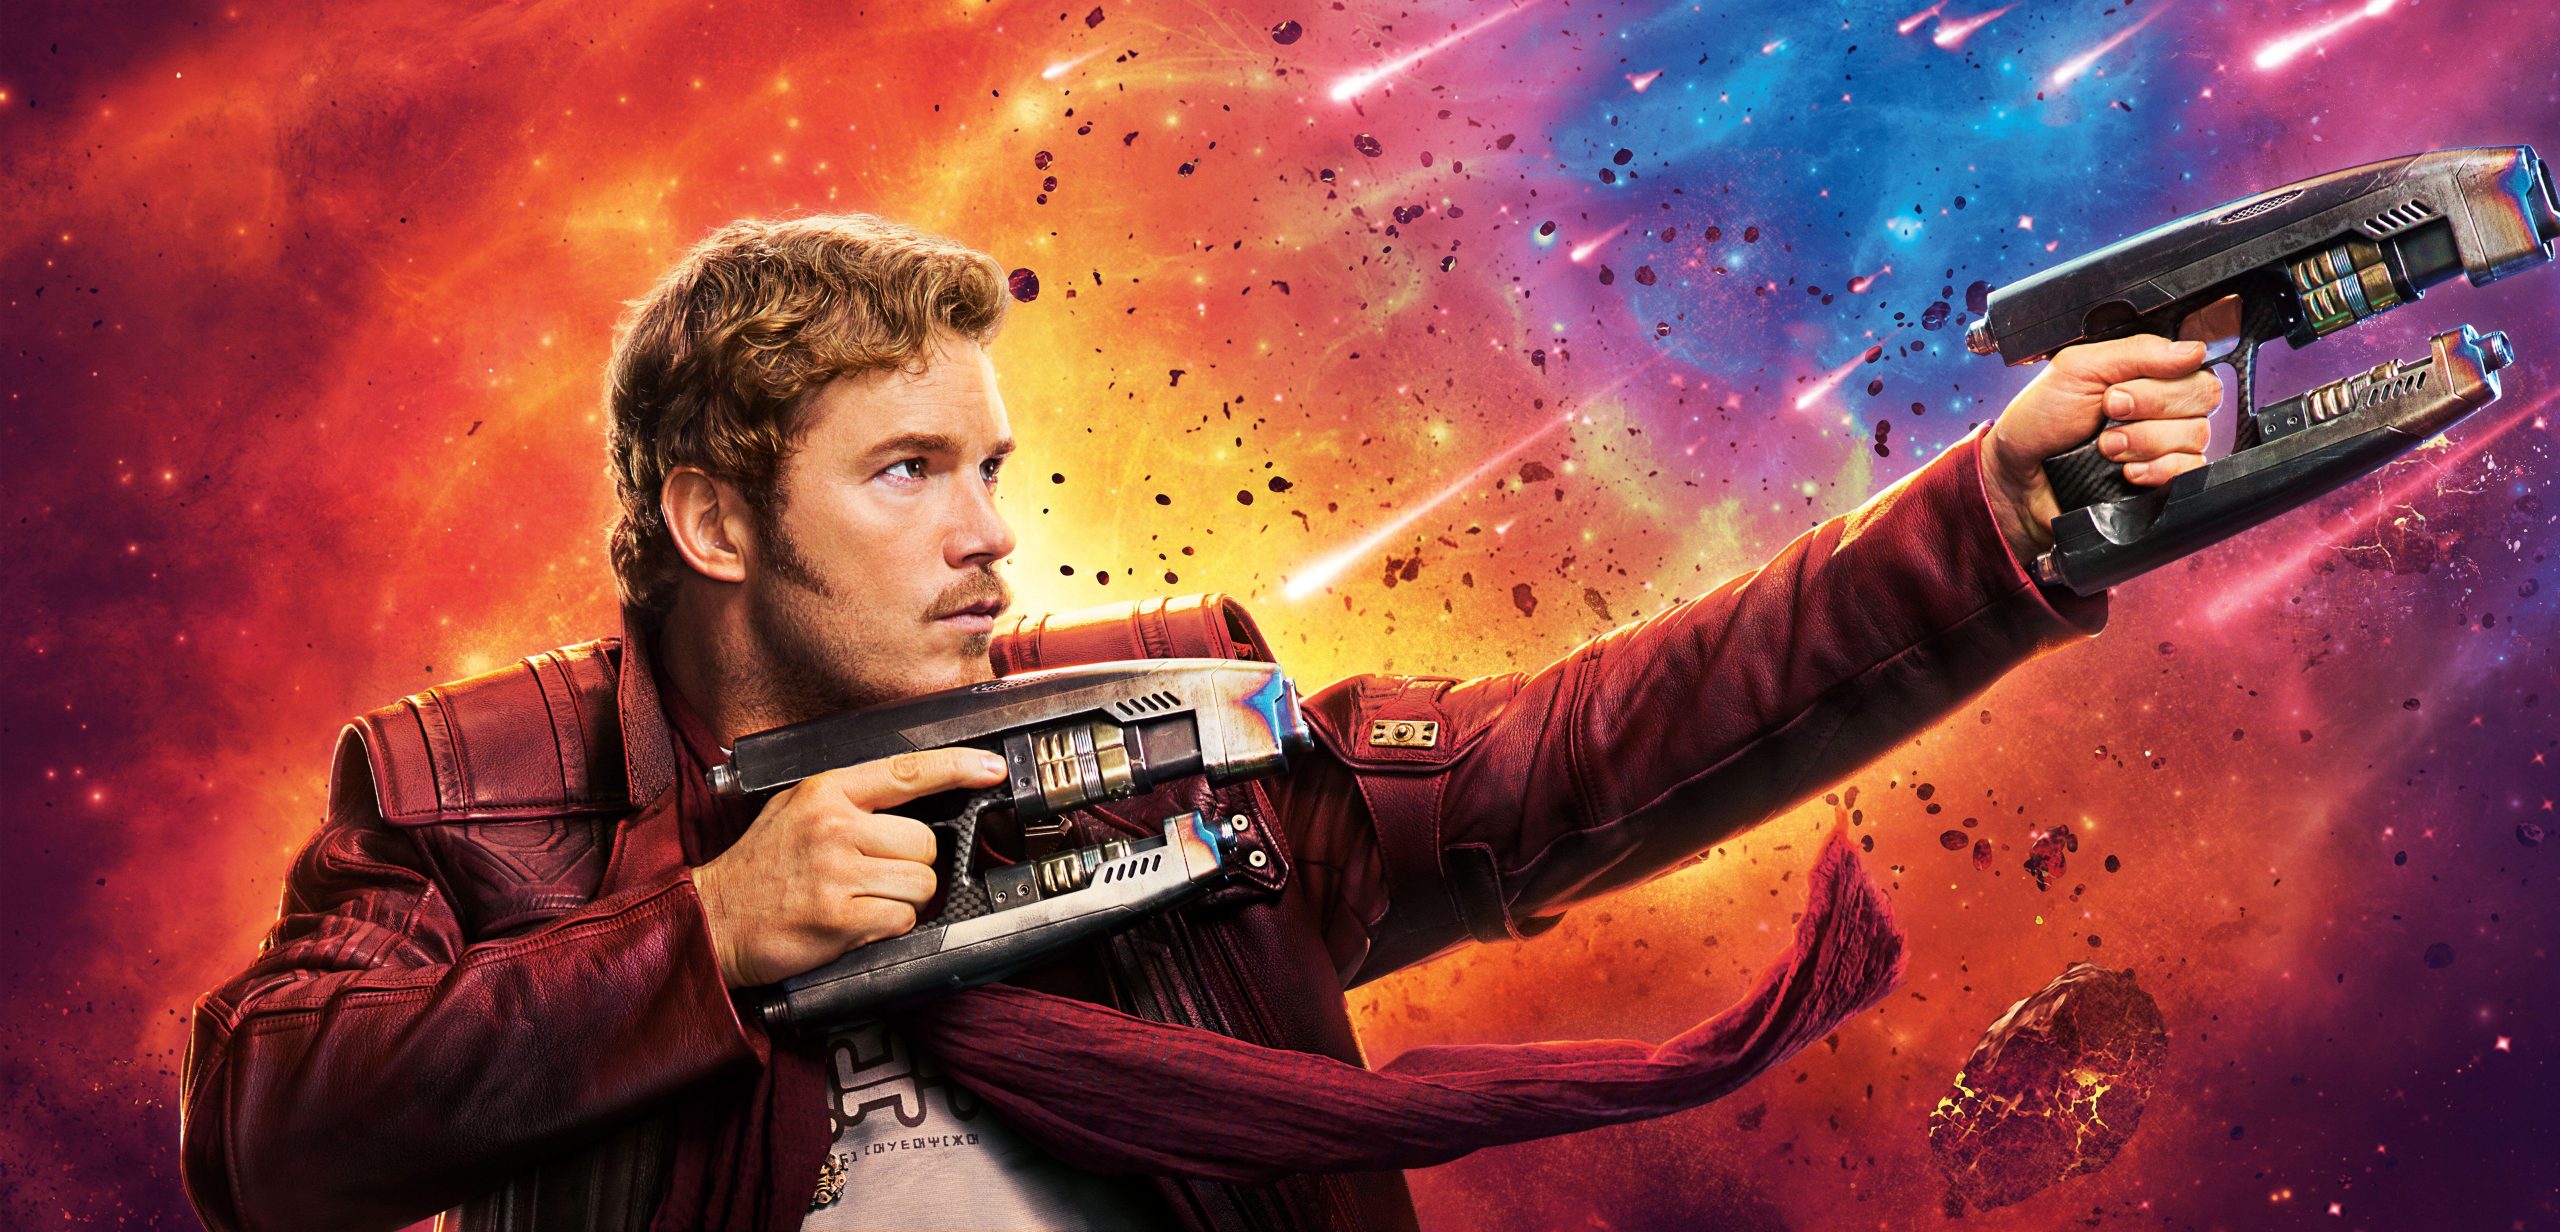 Guardians Of The Galaxy 2 Wallpaper, Guardians Of The Galaxy 2, Movies